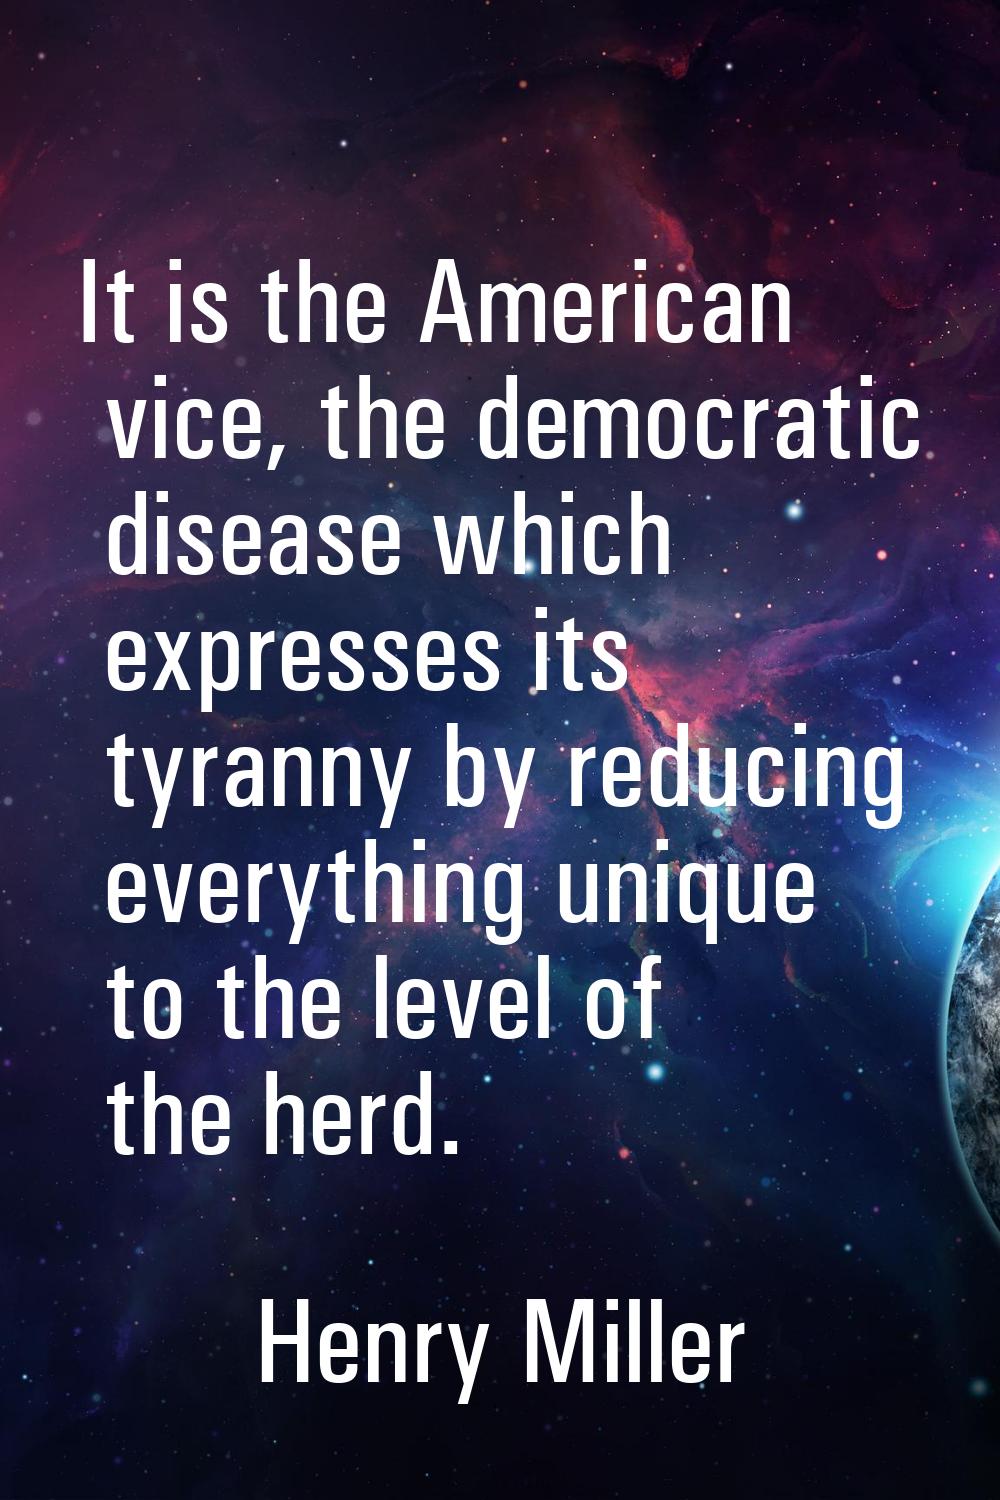 It is the American vice, the democratic disease which expresses its tyranny by reducing everything 